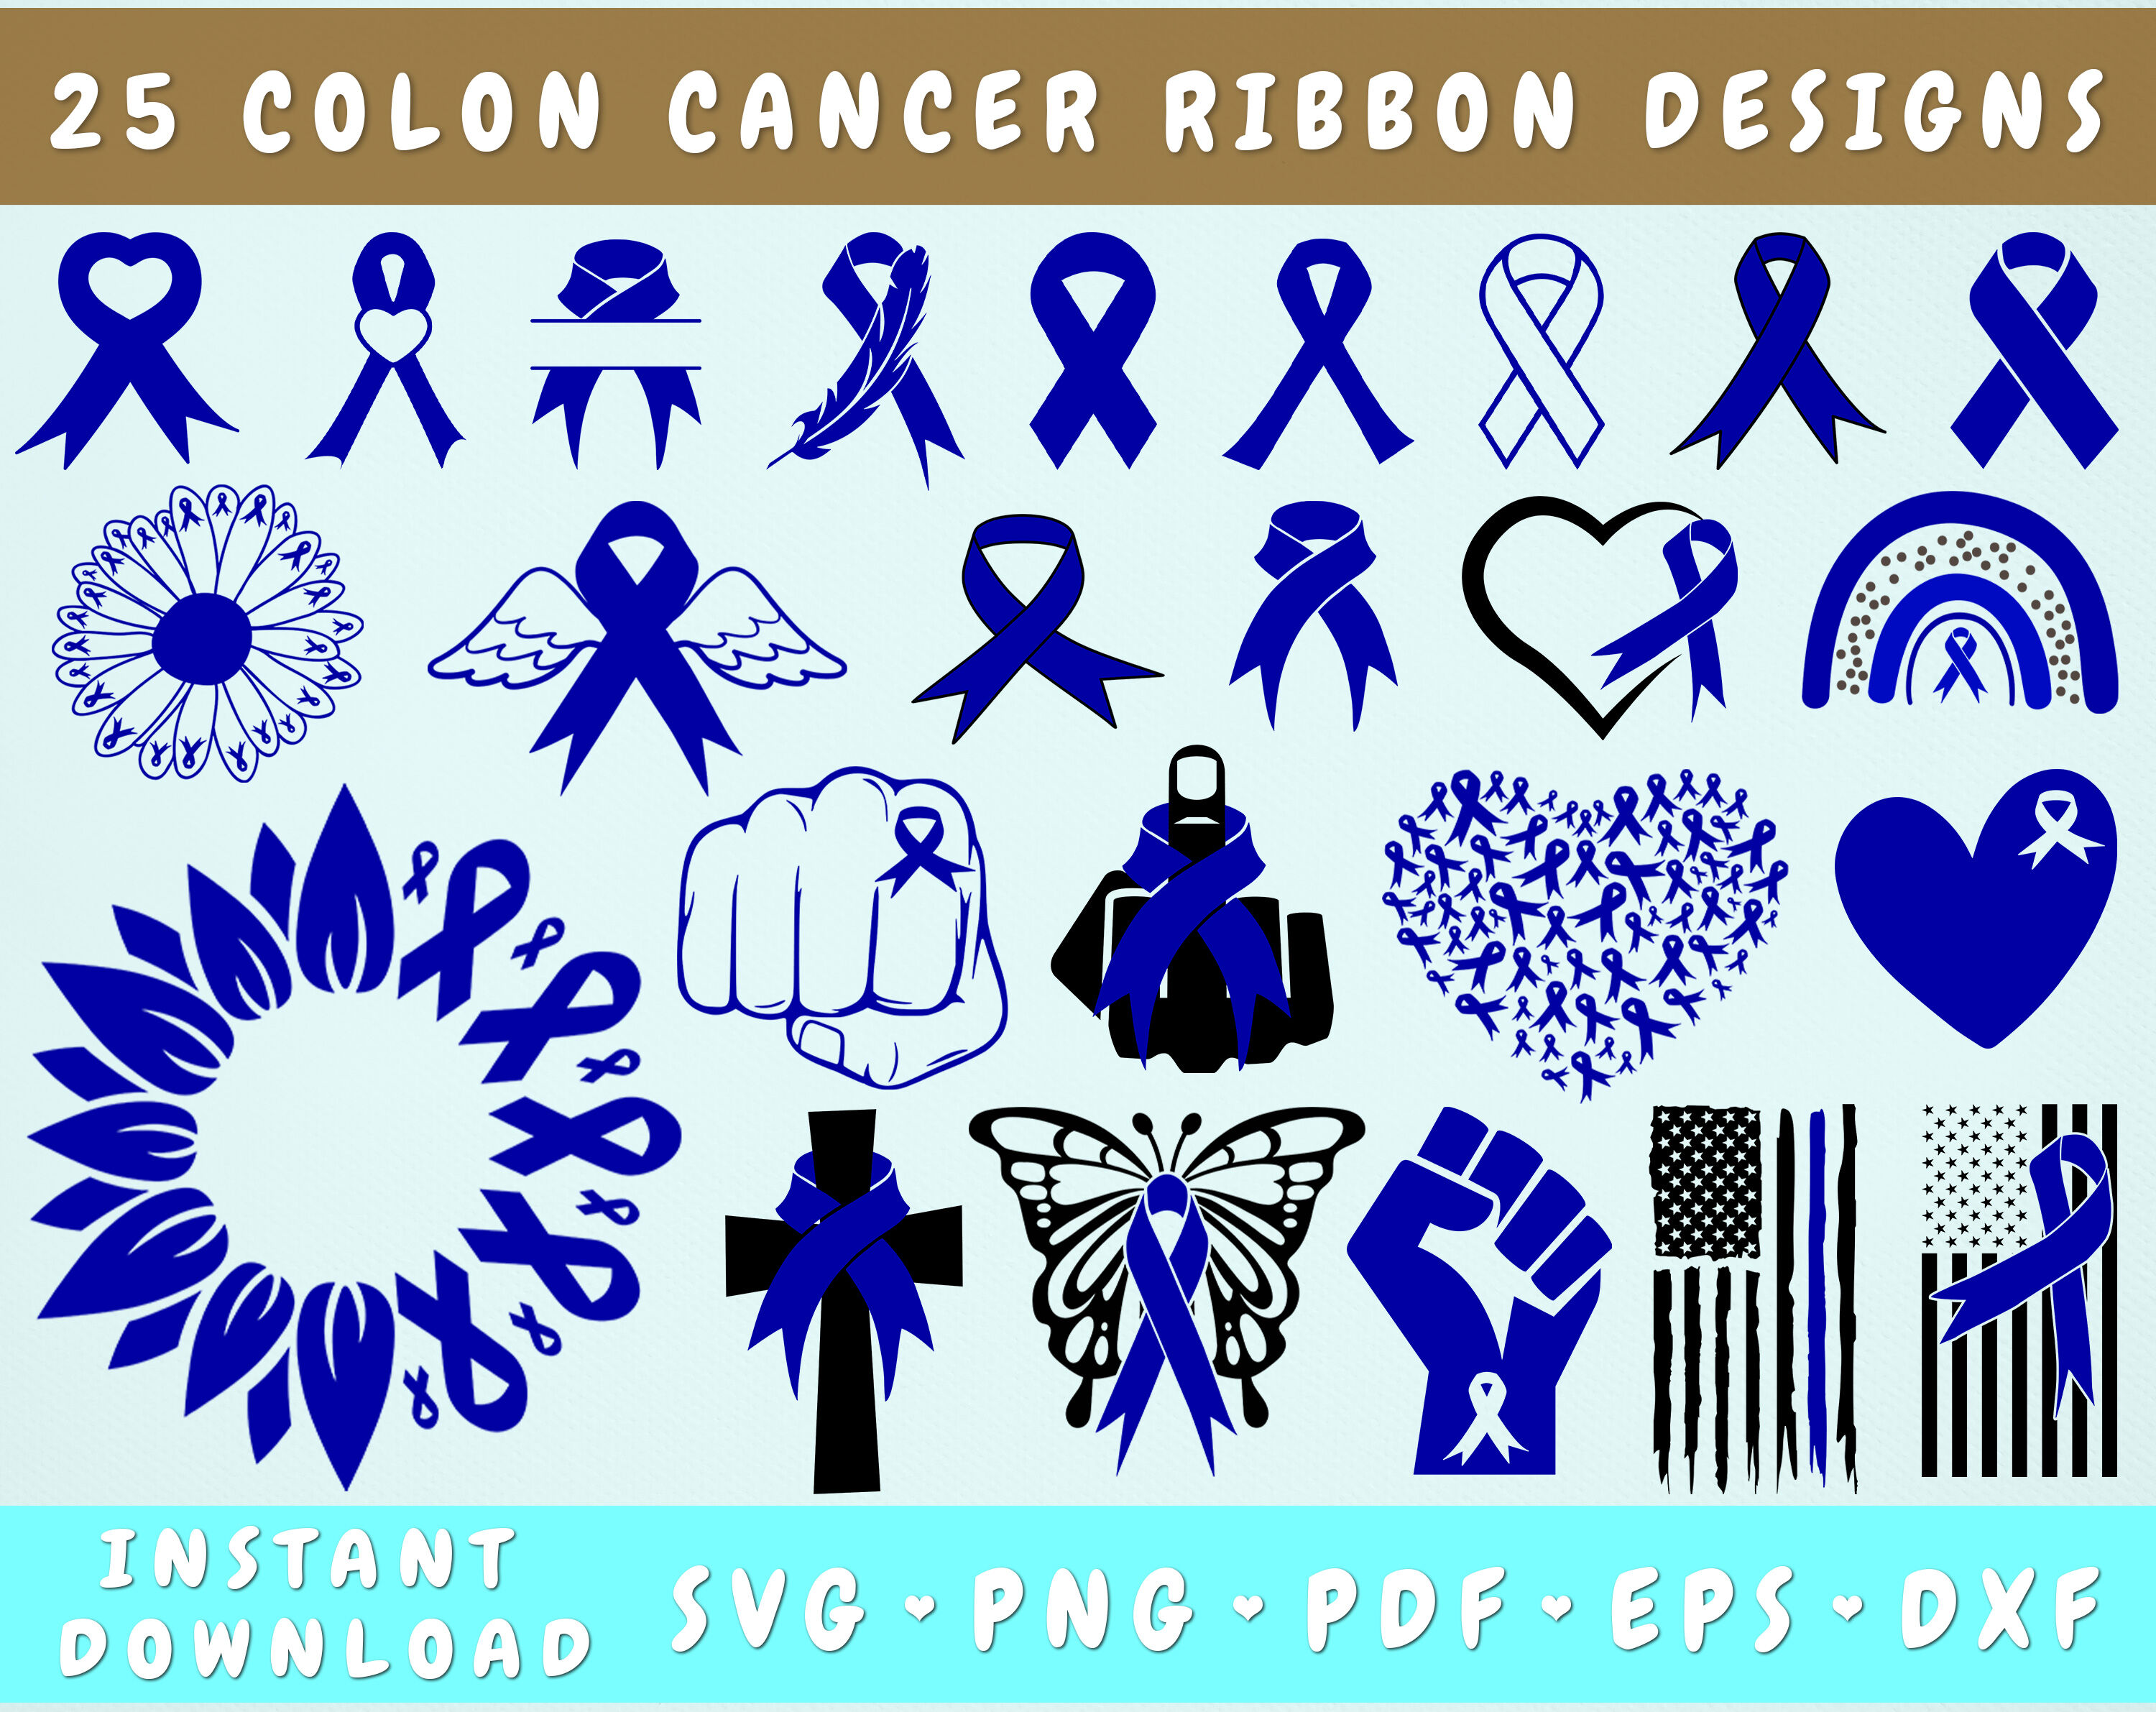 Colon Cancer Ribbon and Butterfly Tattoo - wide 9